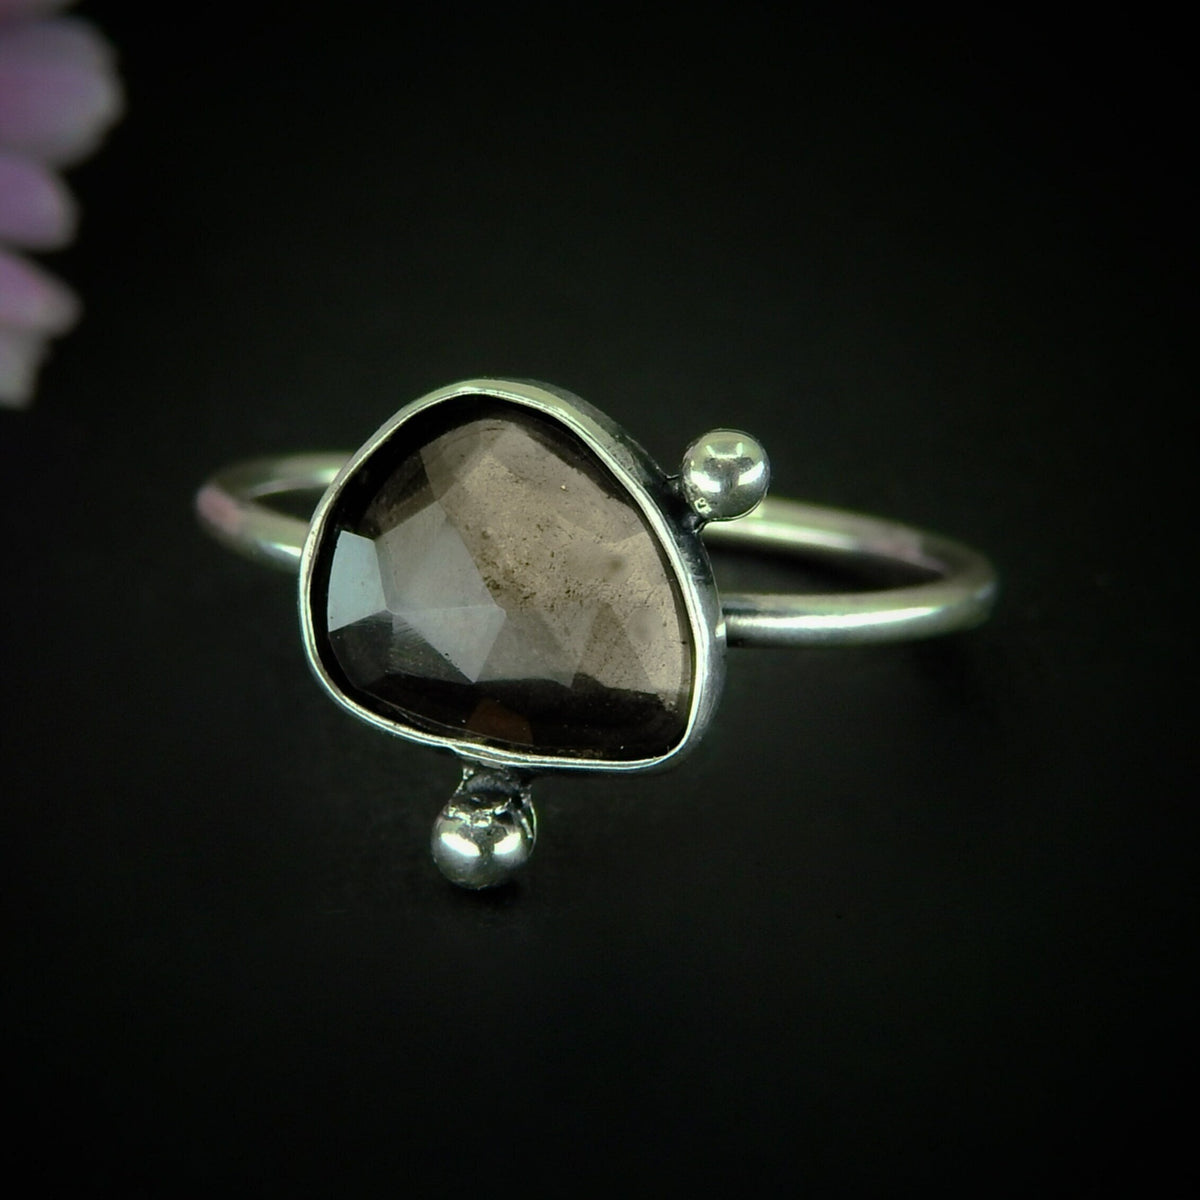 Rose Cut Smoky Quartz Ring - Size 11 1/4 - Sterling Silver - Dainty Smoky Quartz Jewellery - Faceted Gemstone Jewelry - Brown Crystal Ring